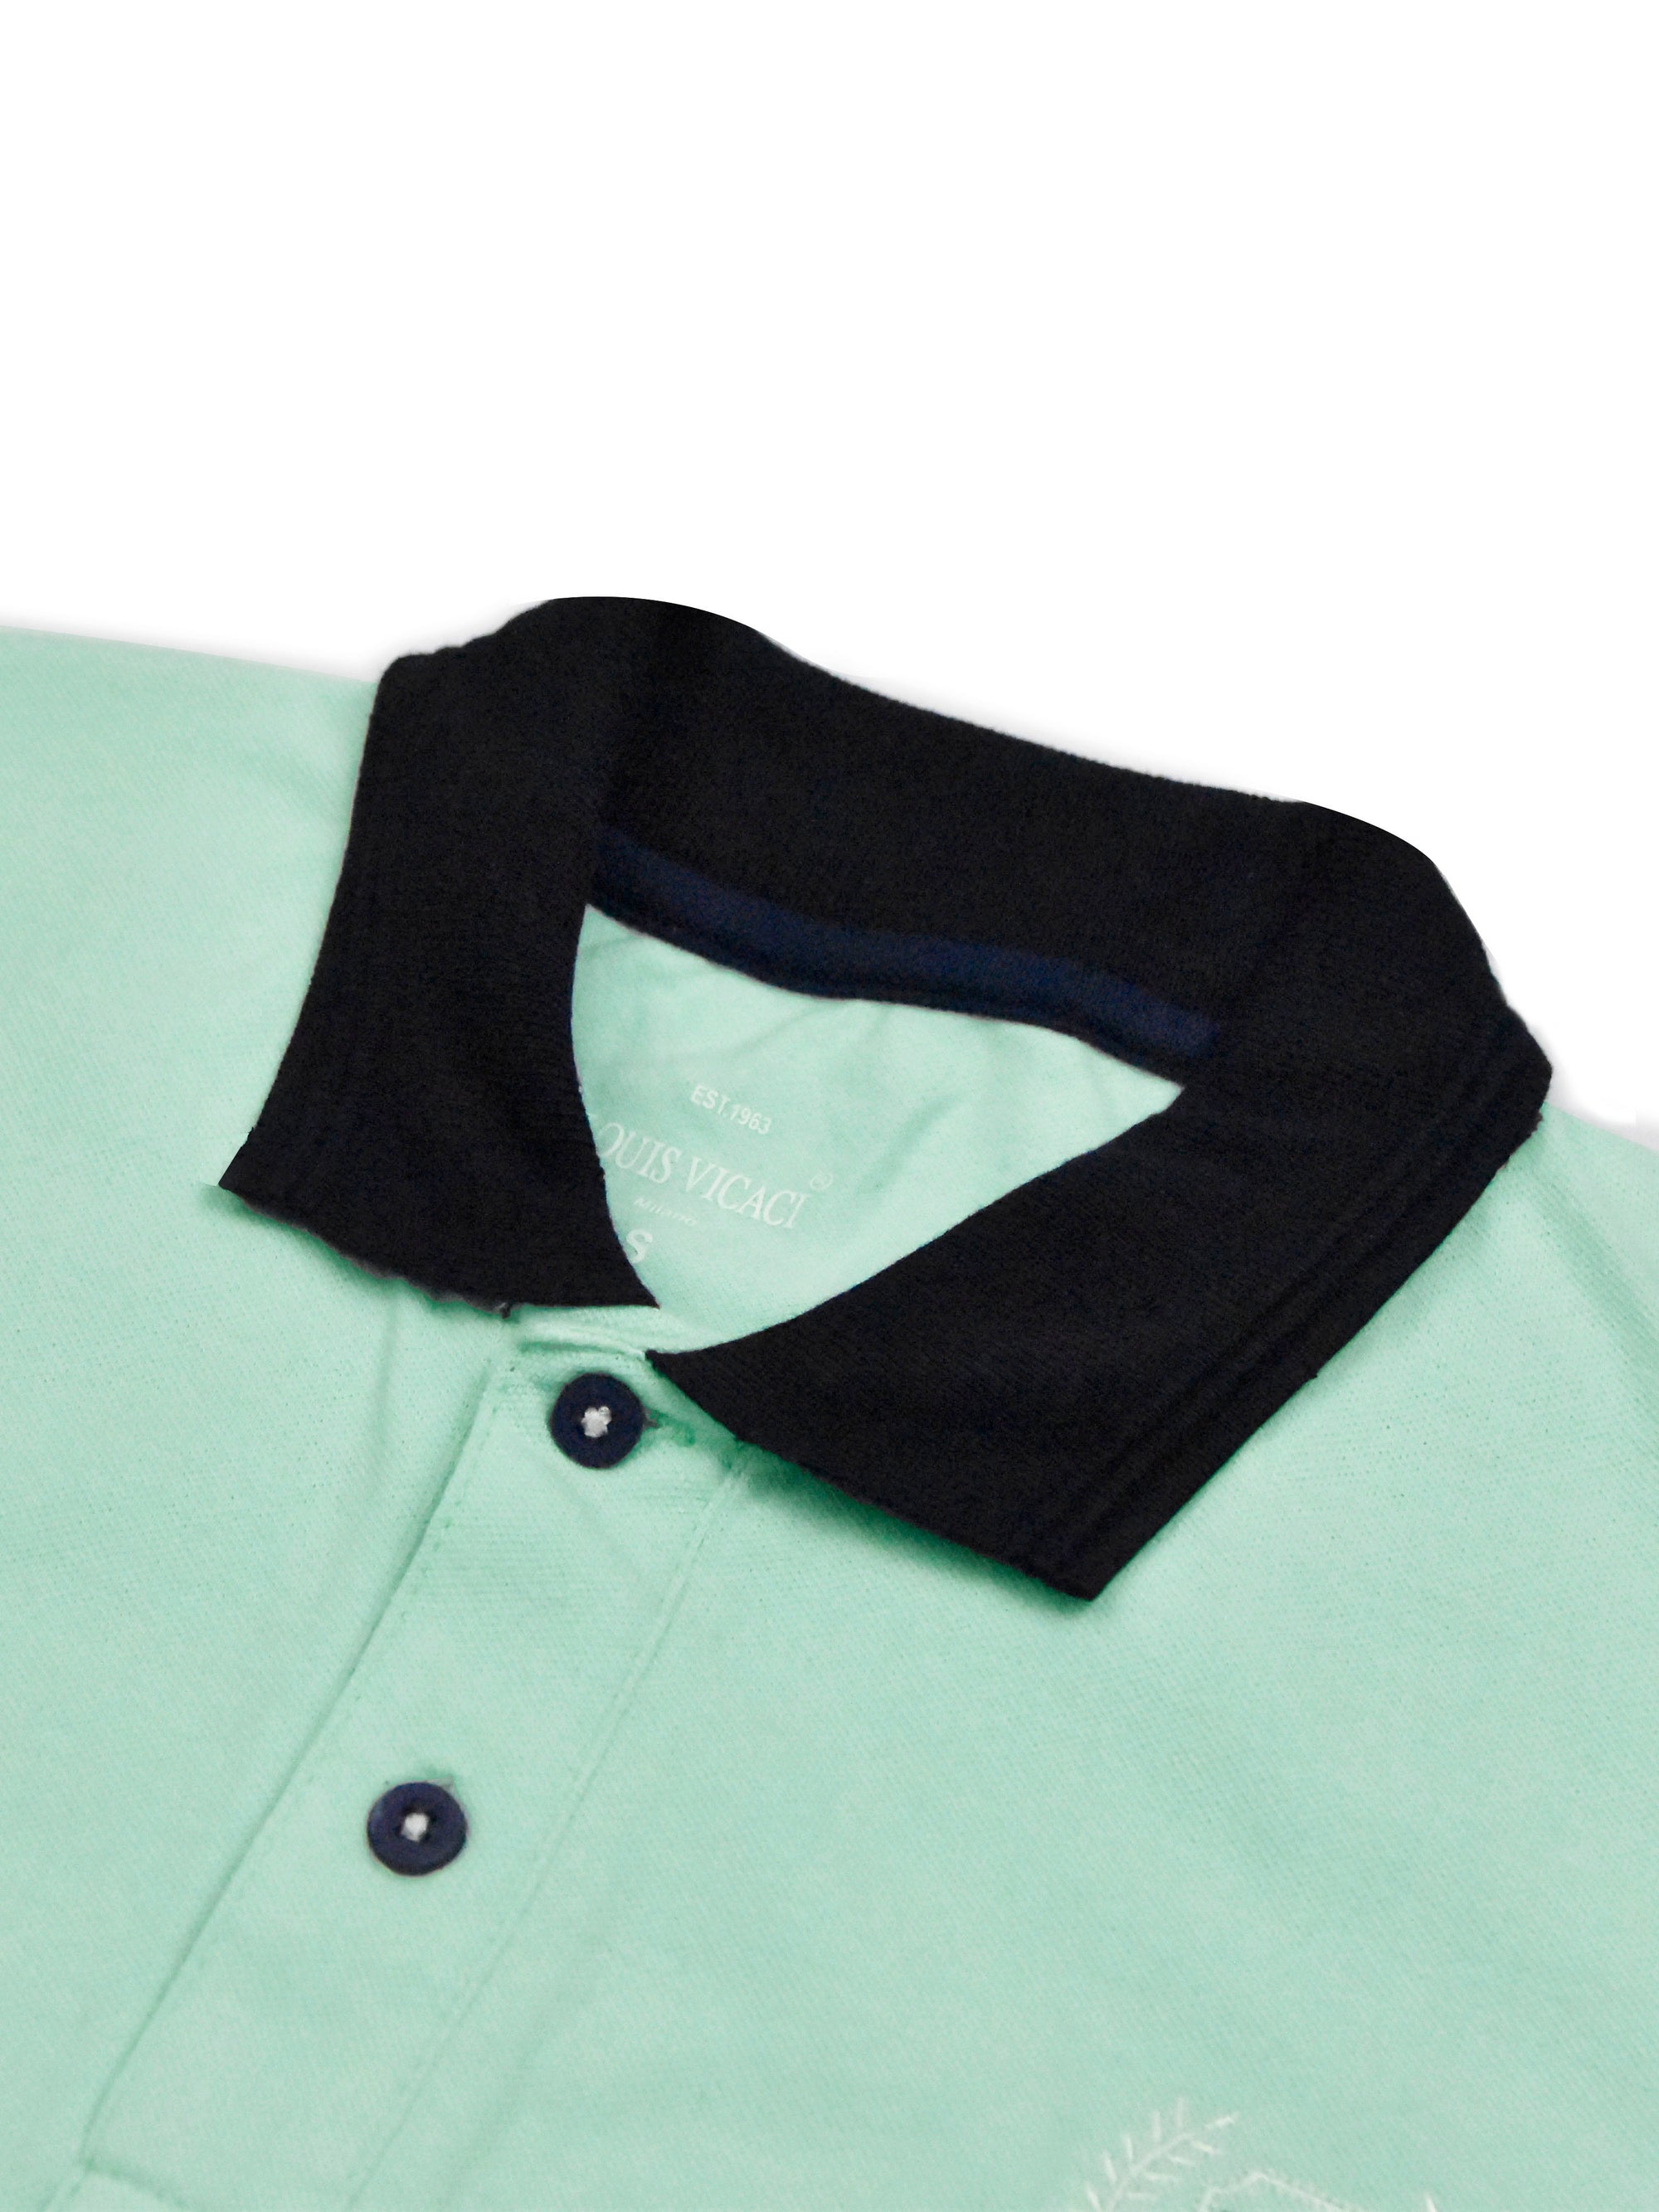 LV Summer Polo Shirt For Men-Light Cyan with Navy-SP1507